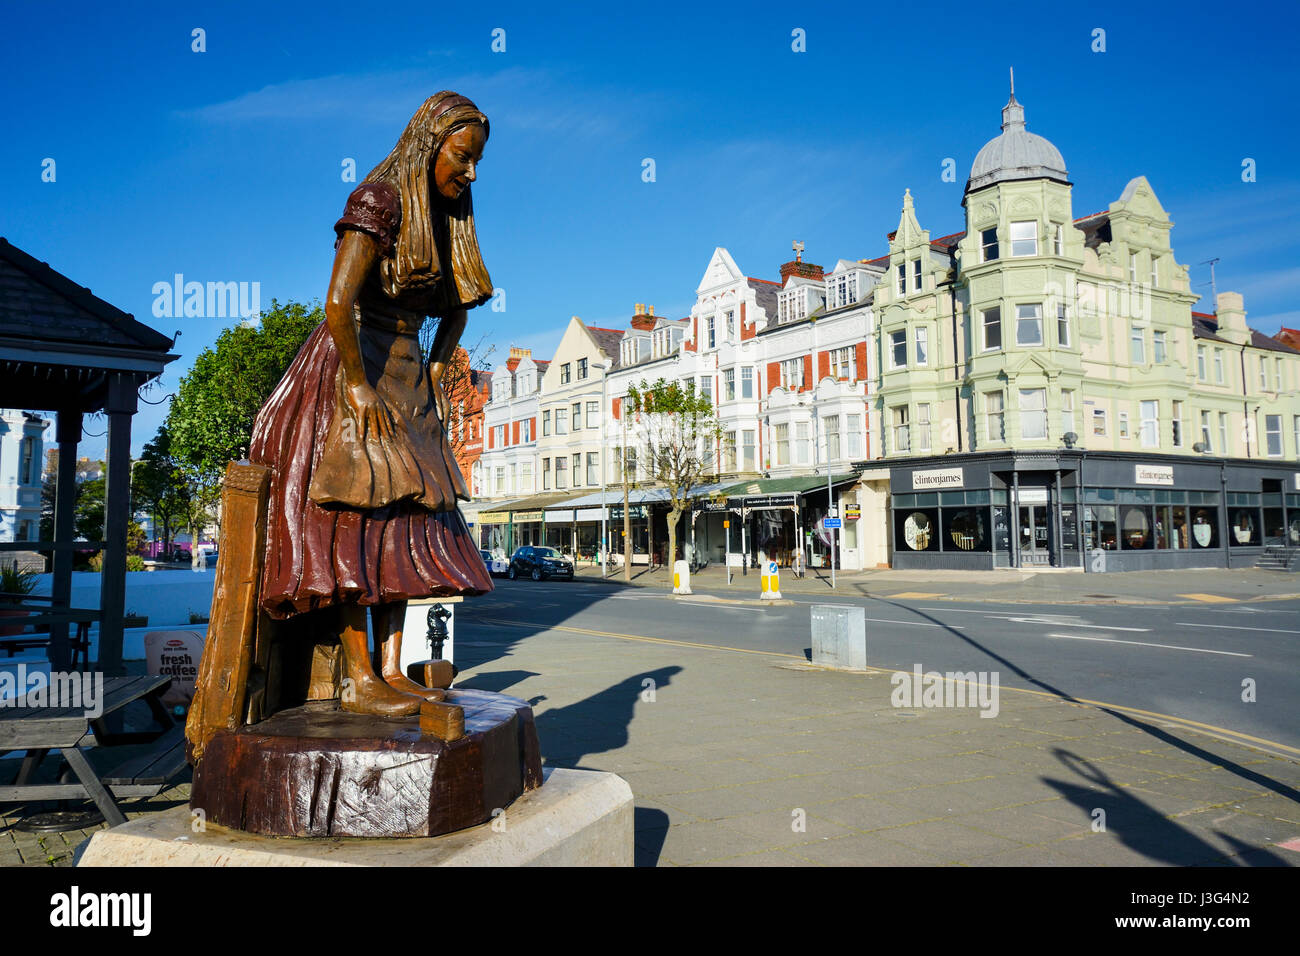 Alice in Wonderland carved wooden statue in Llandudno highlighting the connection to the town with Alice Pleasance Liddell, who the Alice in Wonderlan Stock Photo